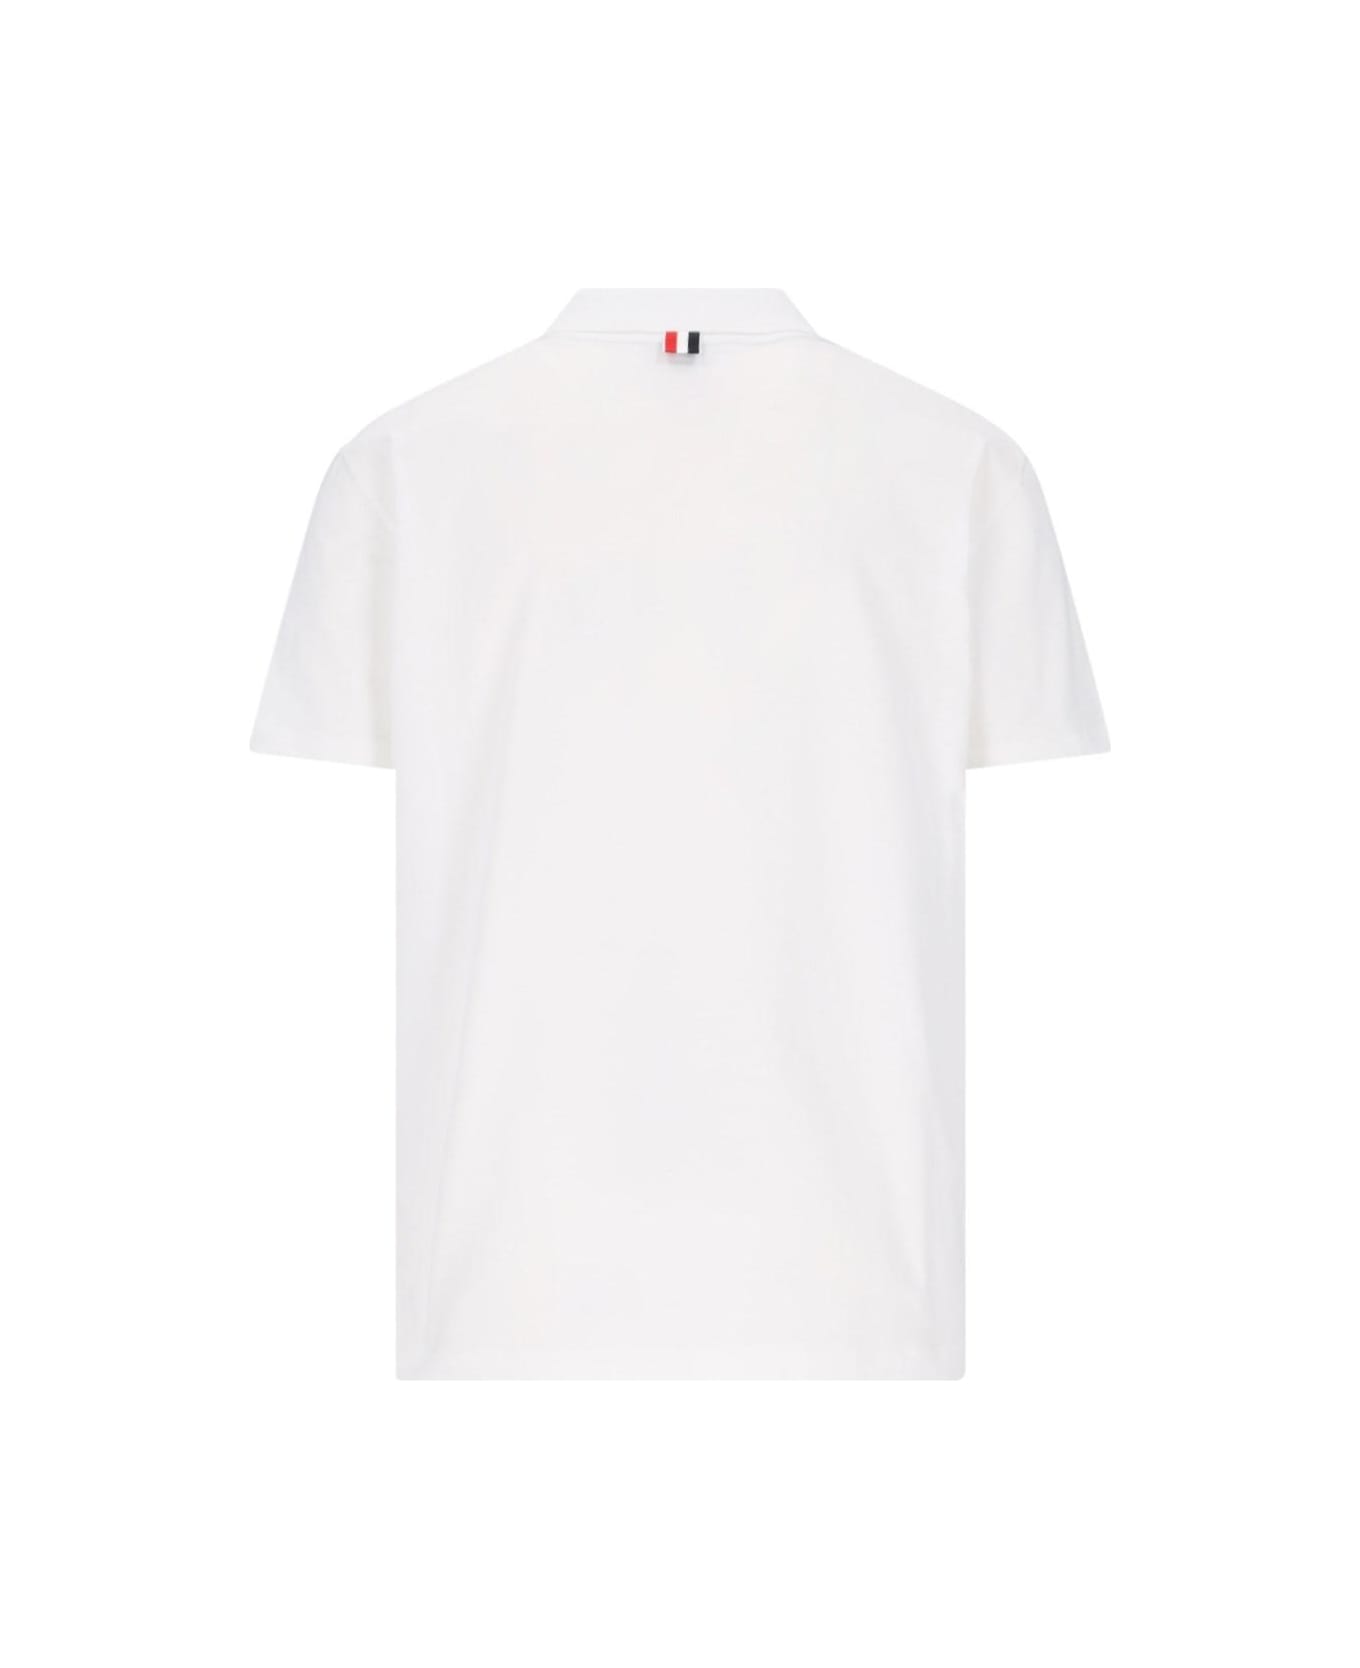 Thom Browne Color Block Polo Shirt - Light blue ポロシャツ